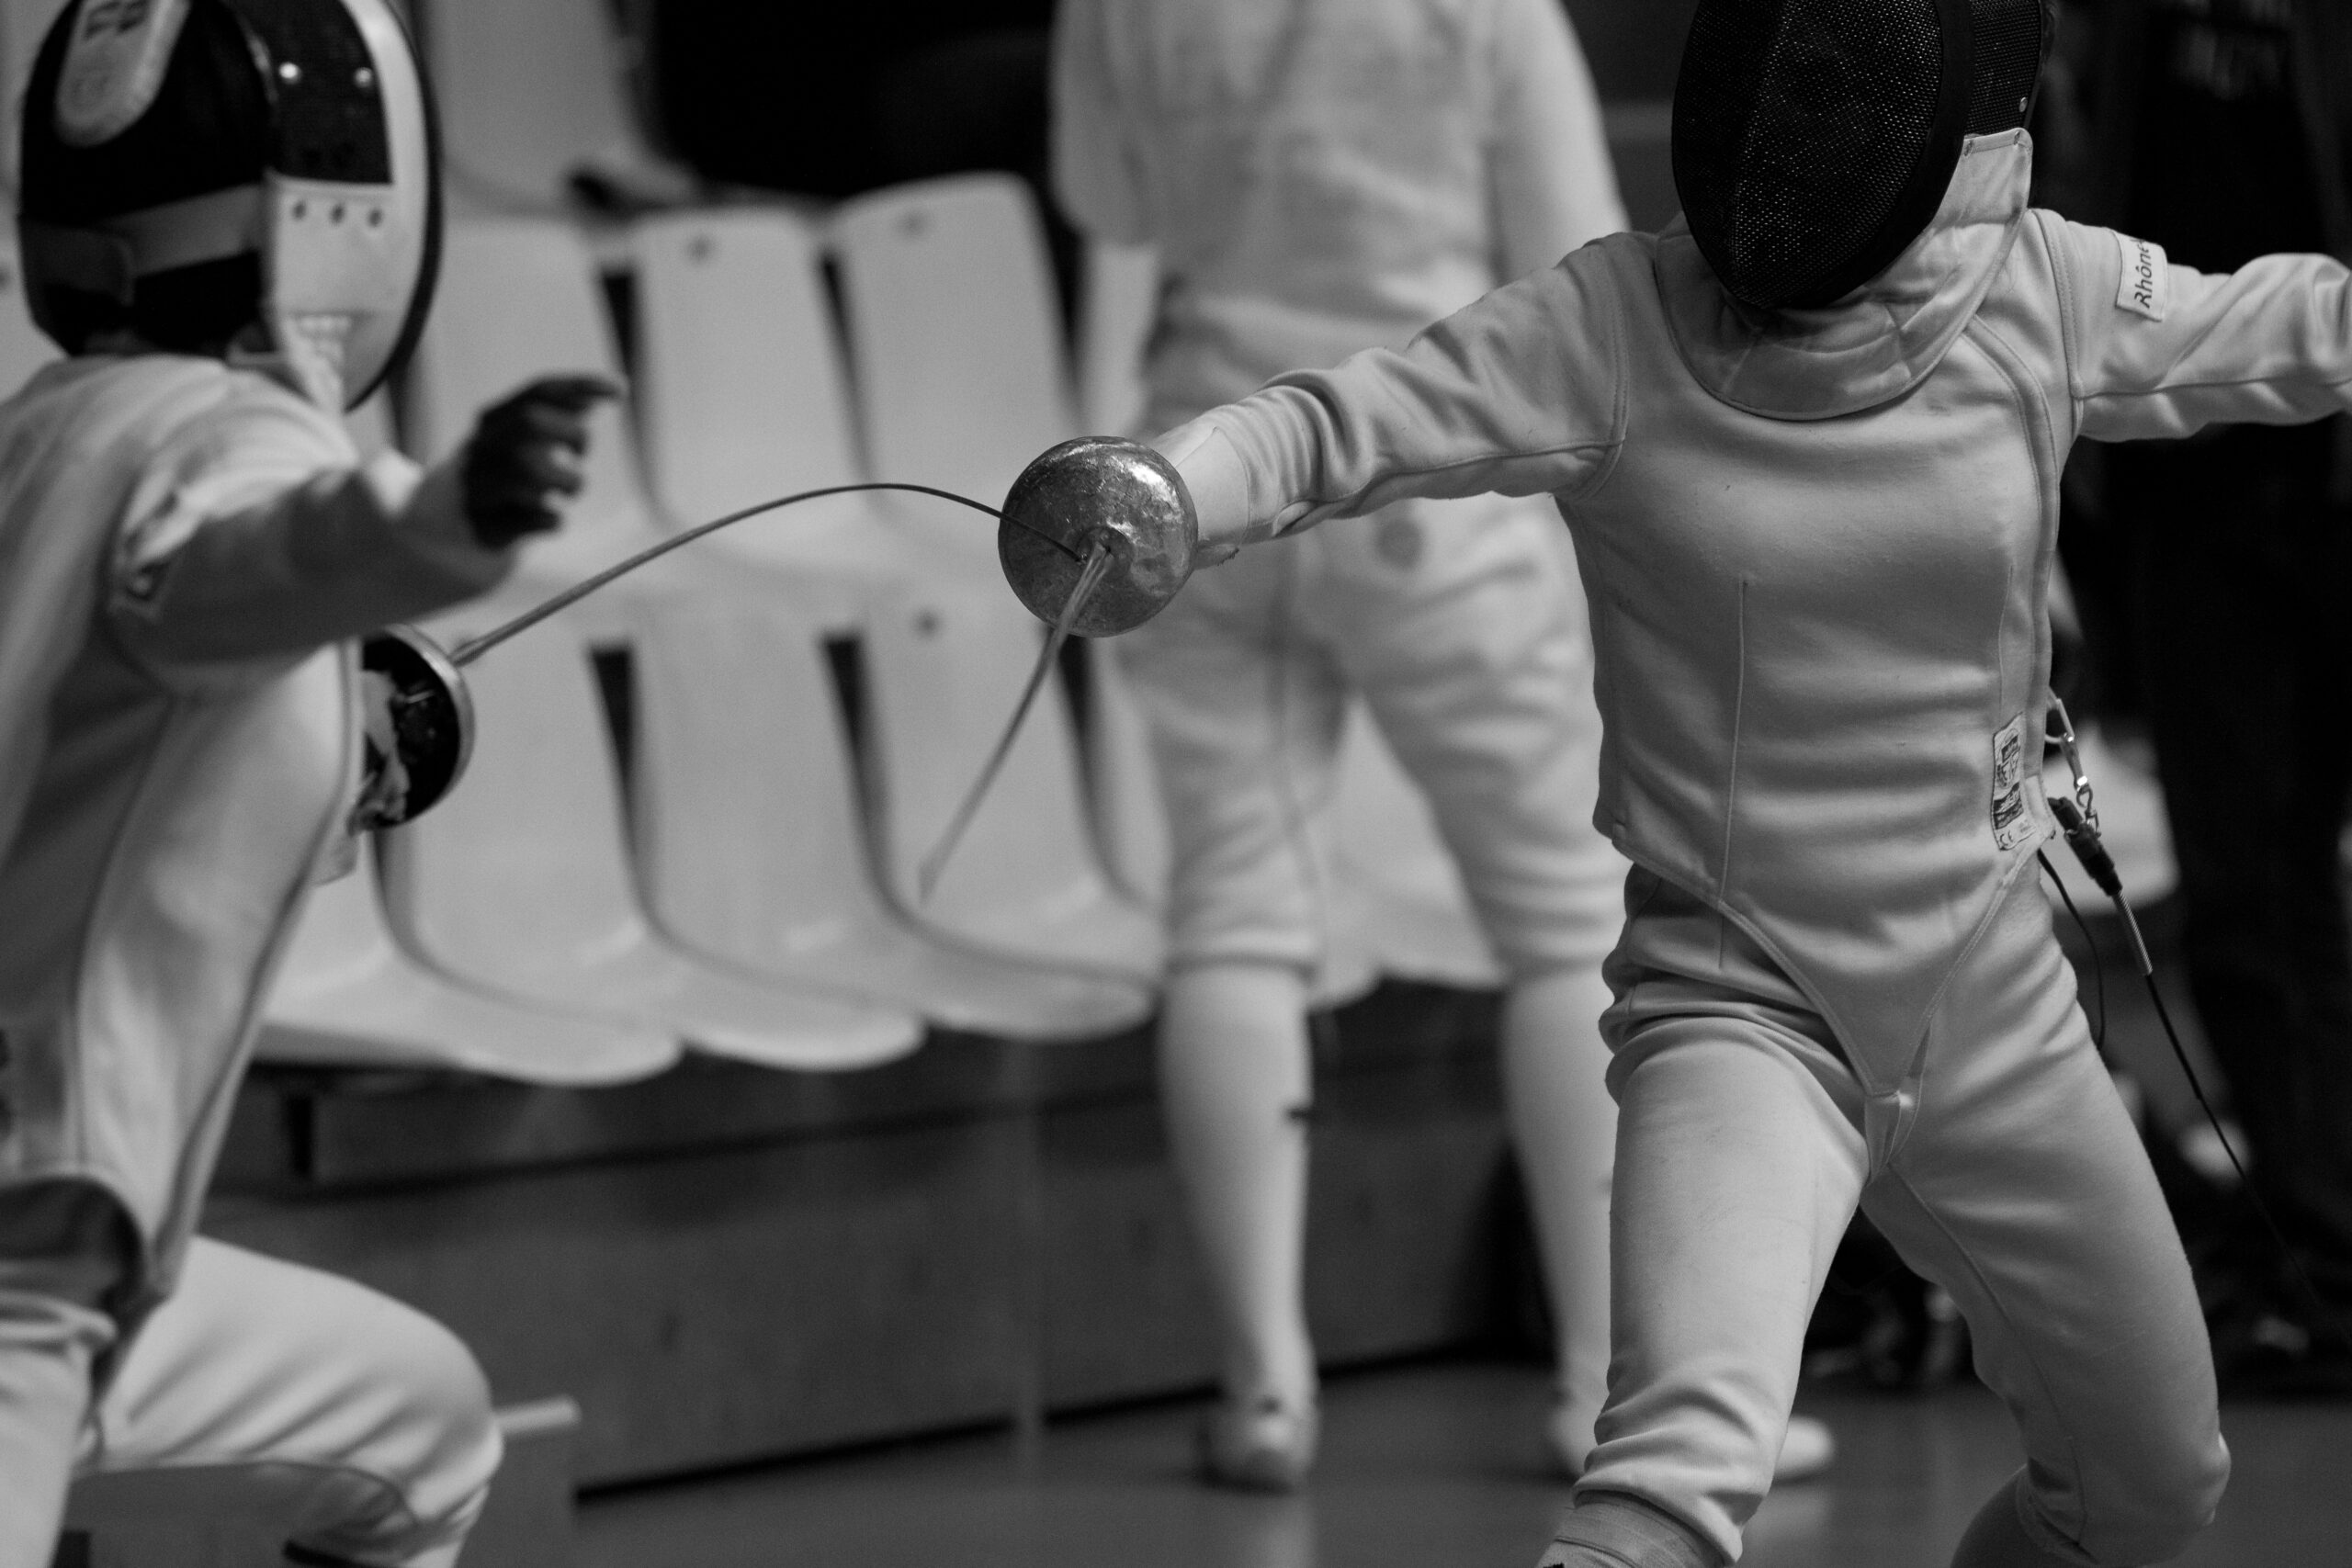 High-Tech iPhone Games Sharpen Olympic Fencer’s Concentration